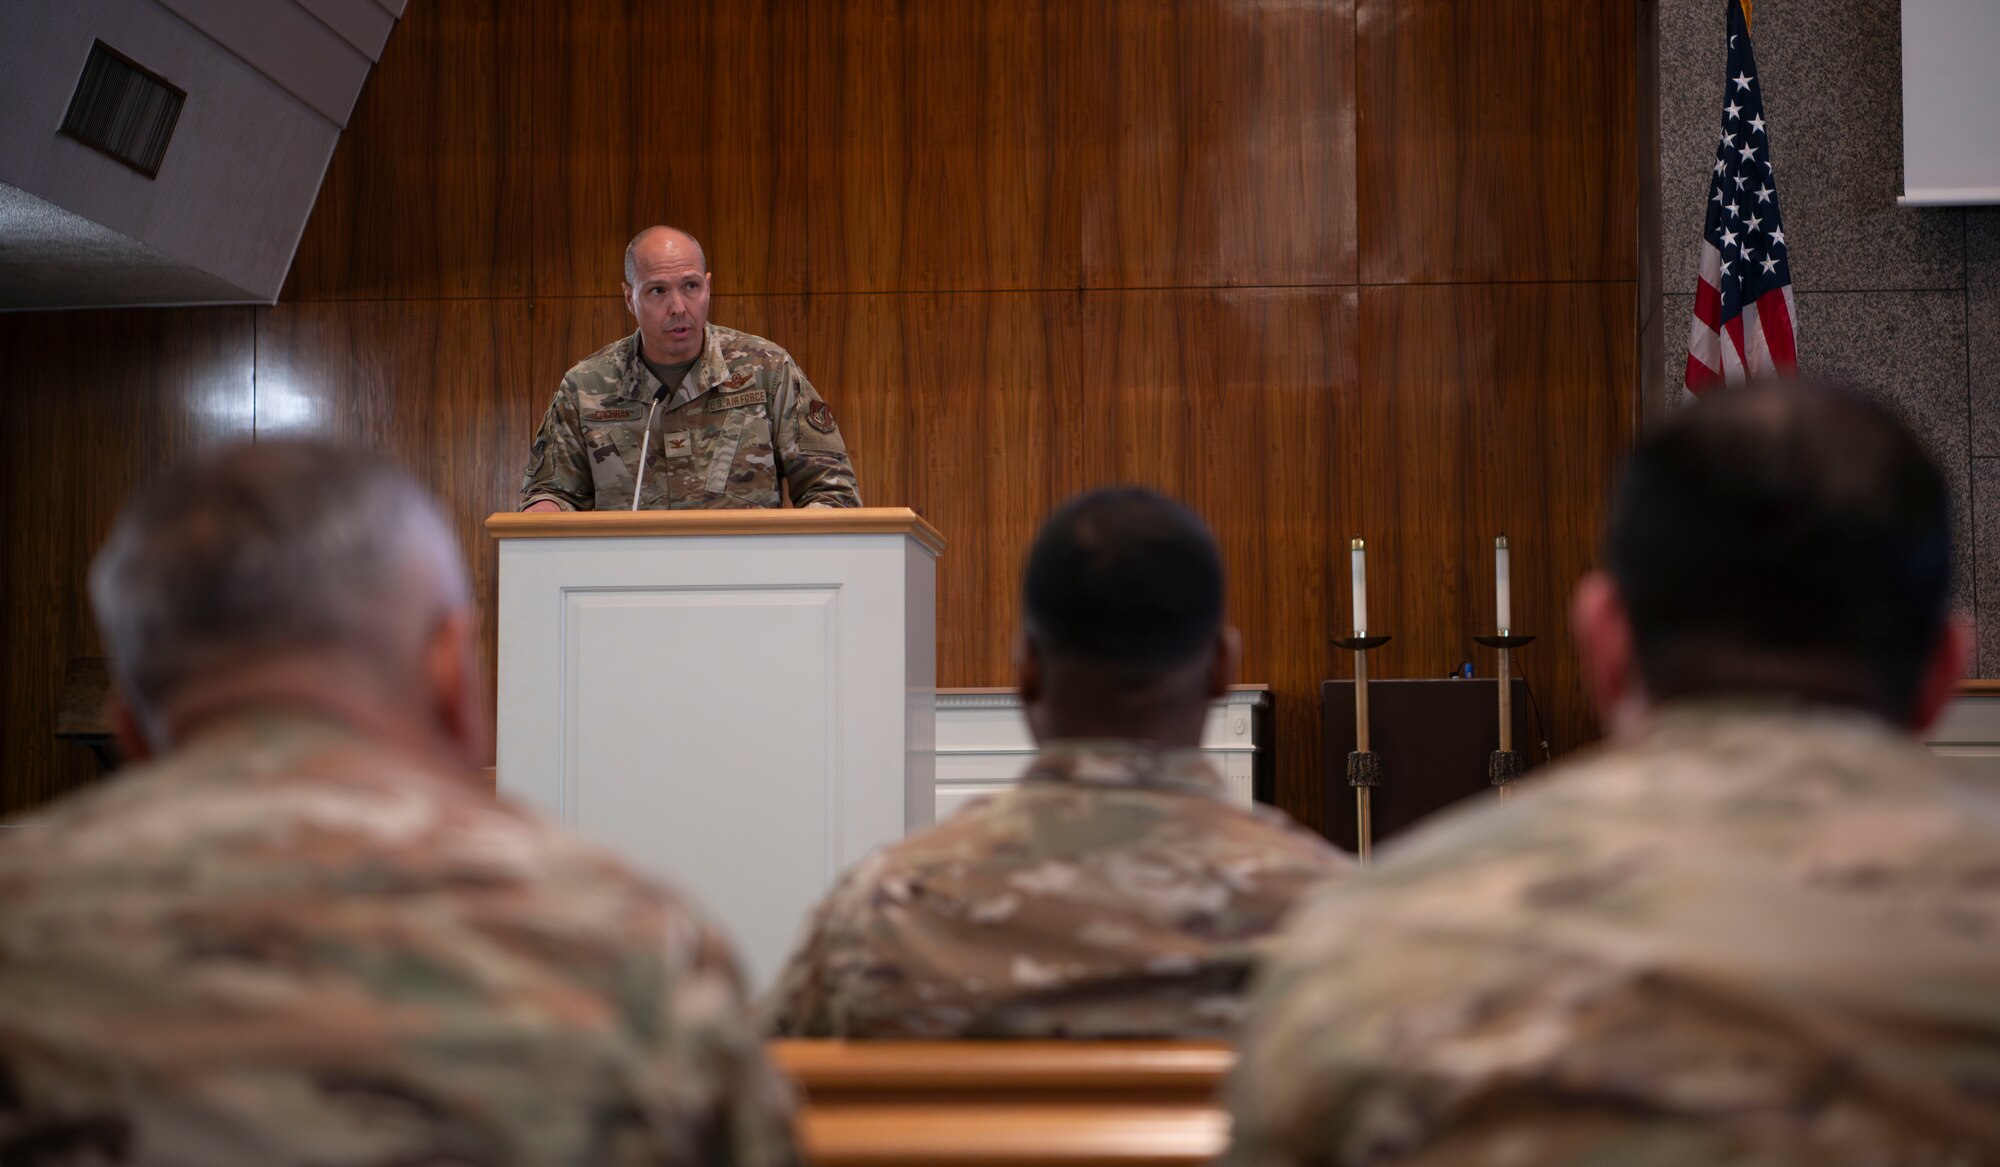 A military member speaks to a group of military members.